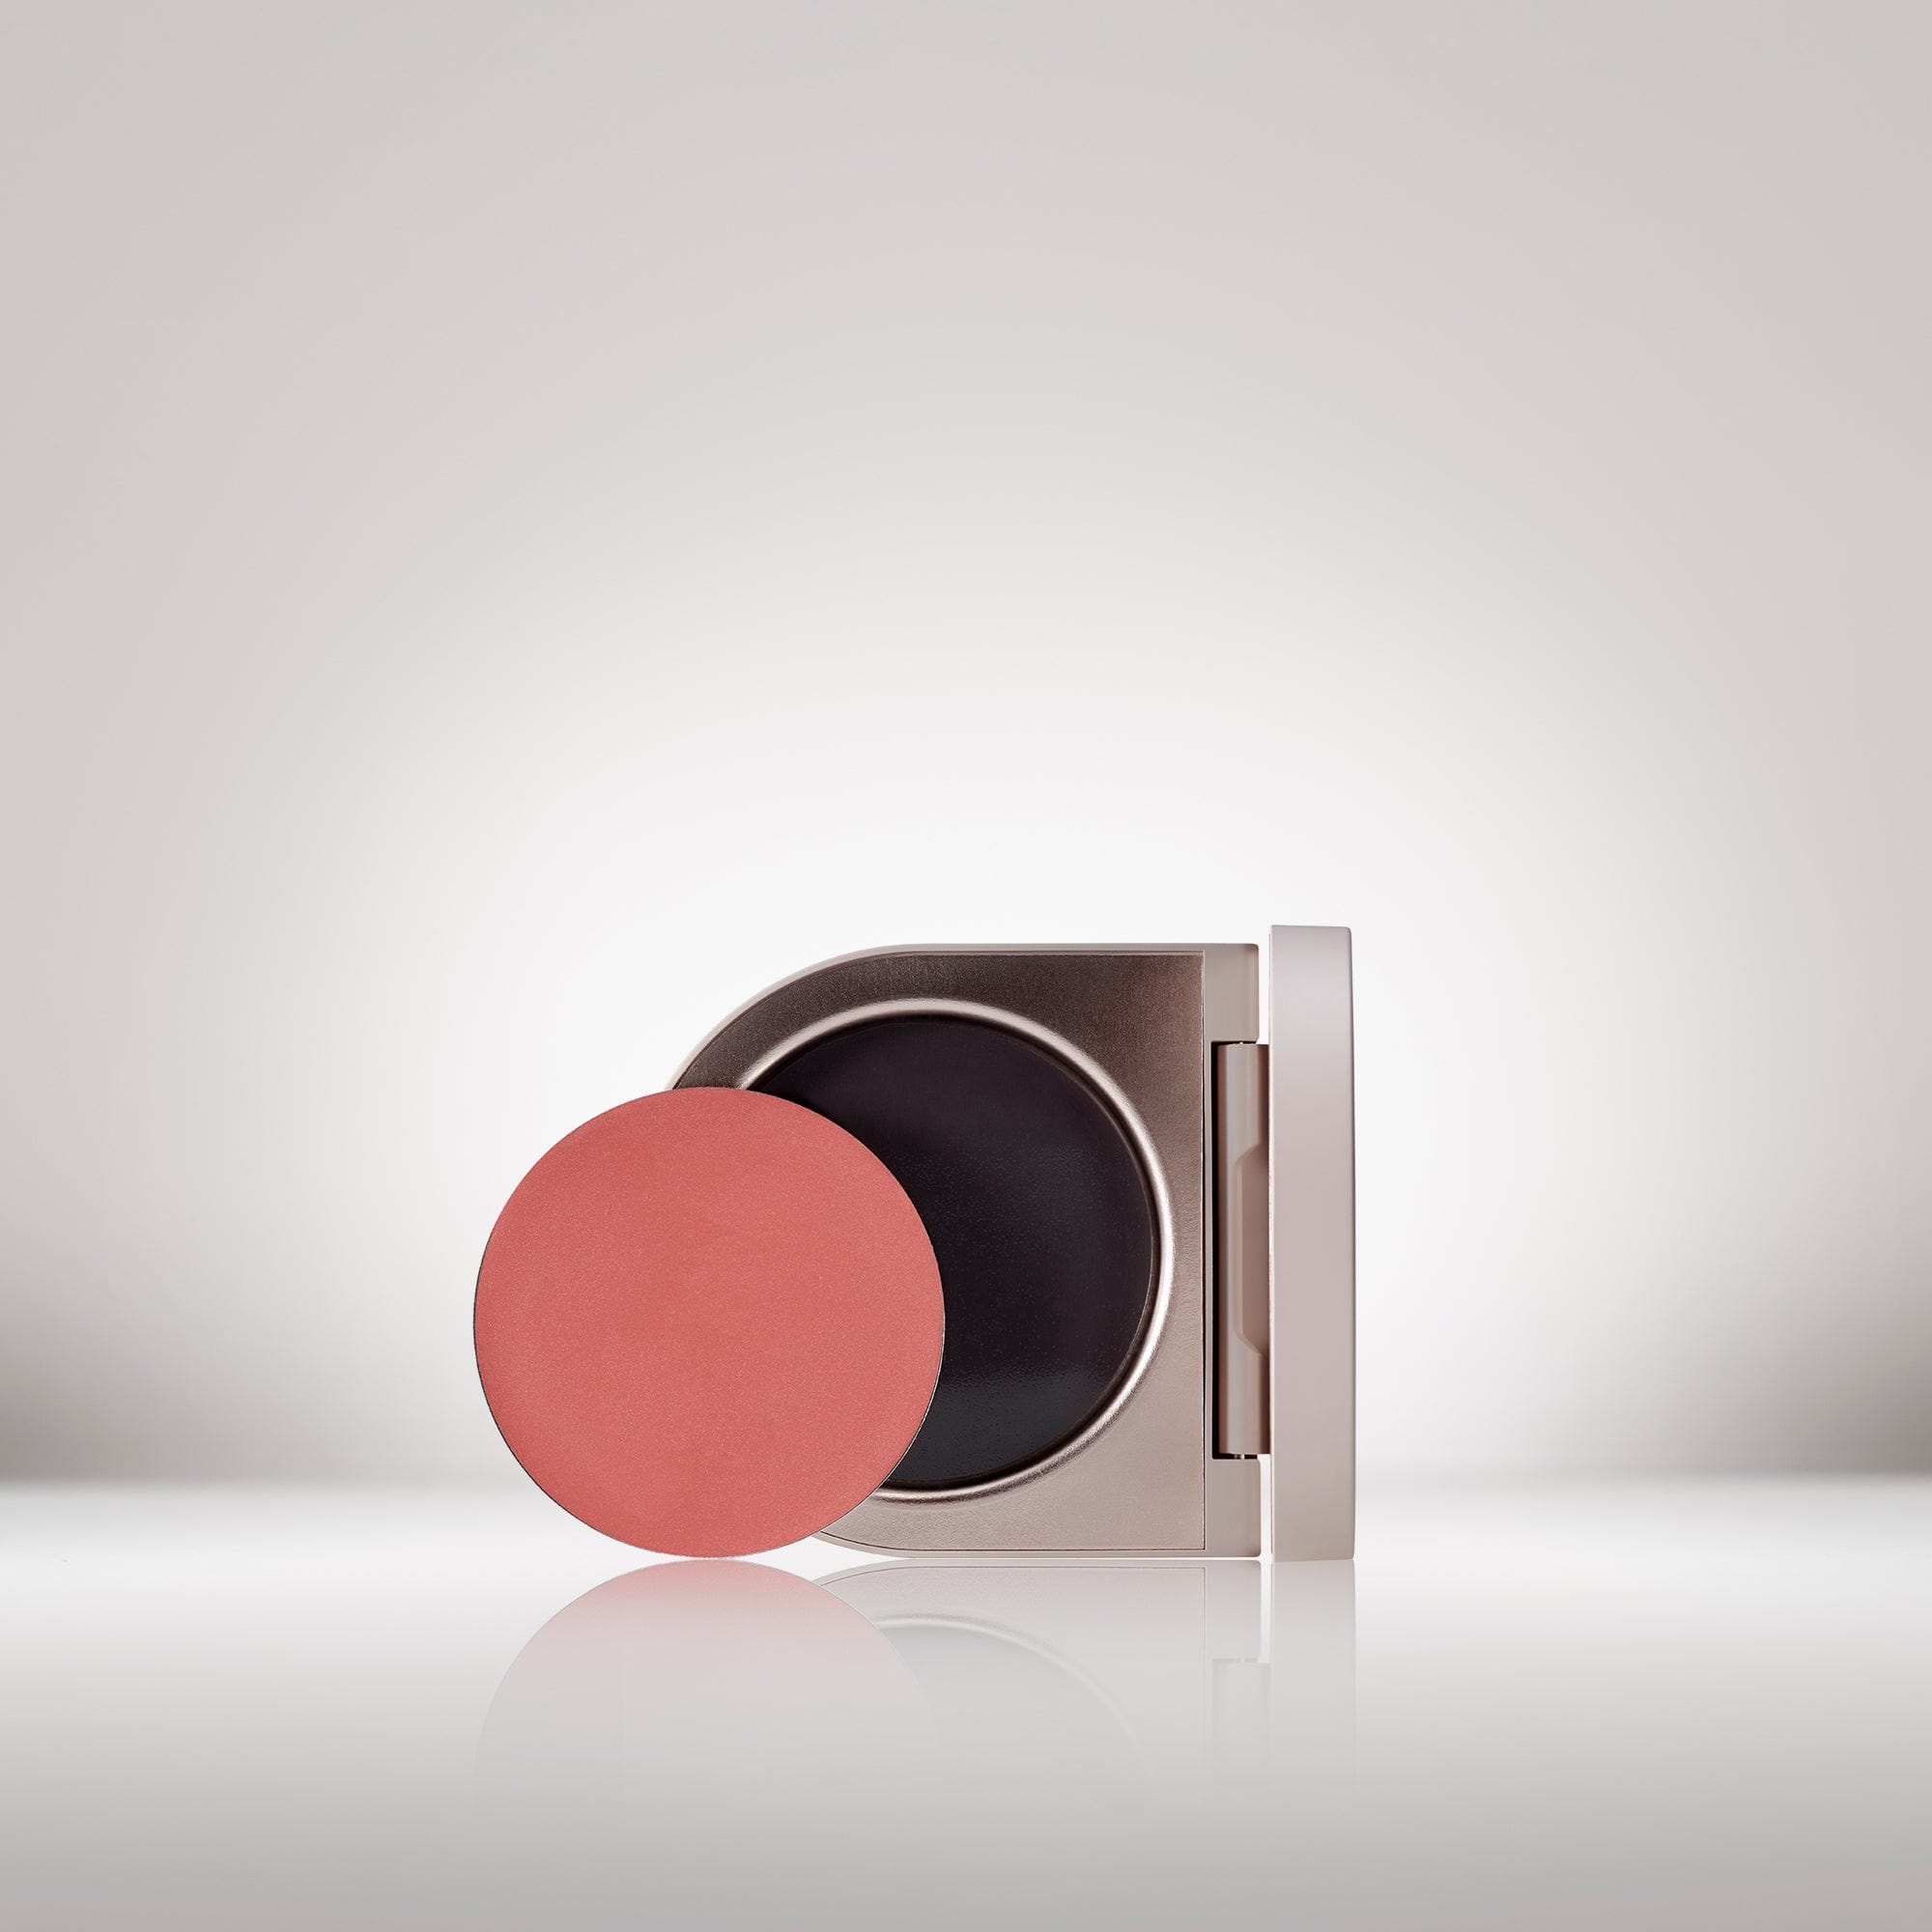 Image of the Cream Blush Refillable Cheek & Lip Color in Wisteria in front of the open compact - Cream blush